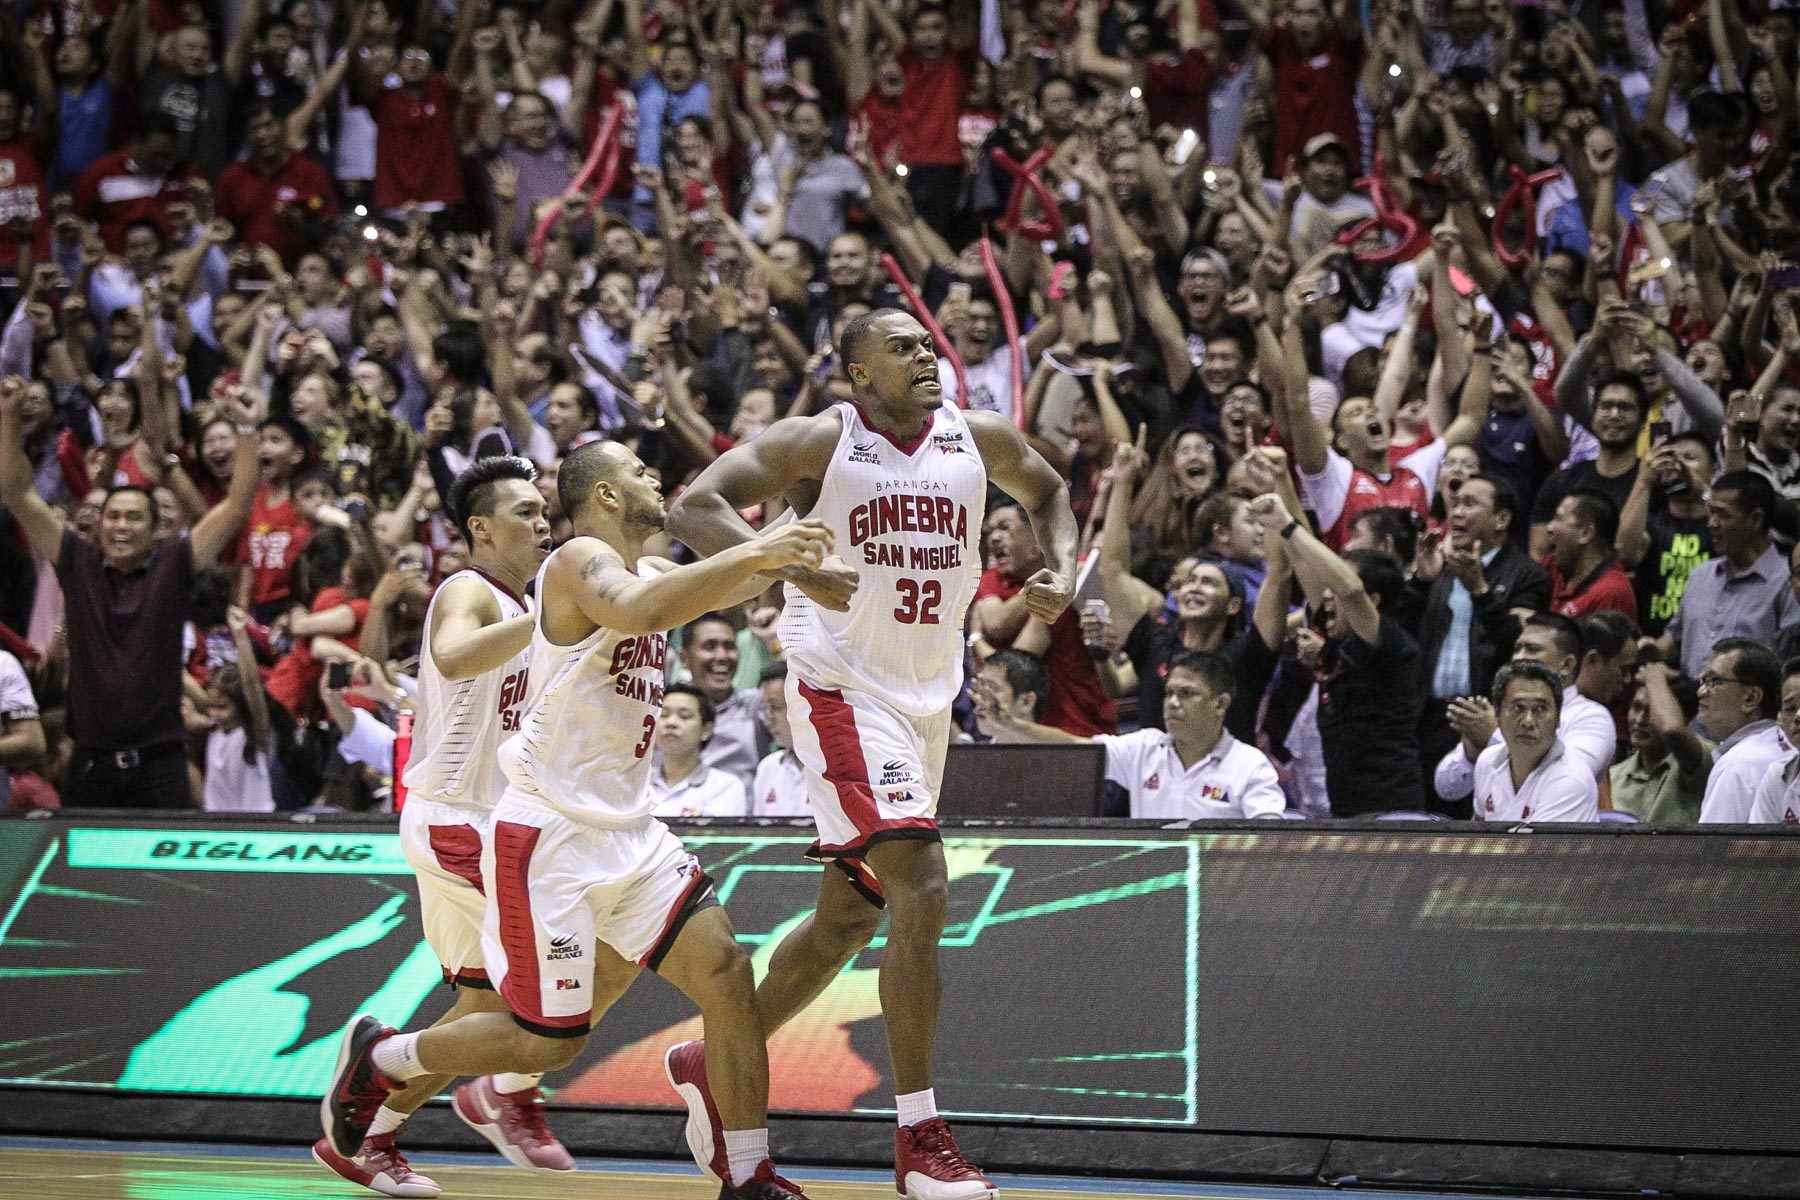 Brownlee’s childhood dream comes true with Ginebra game-winner